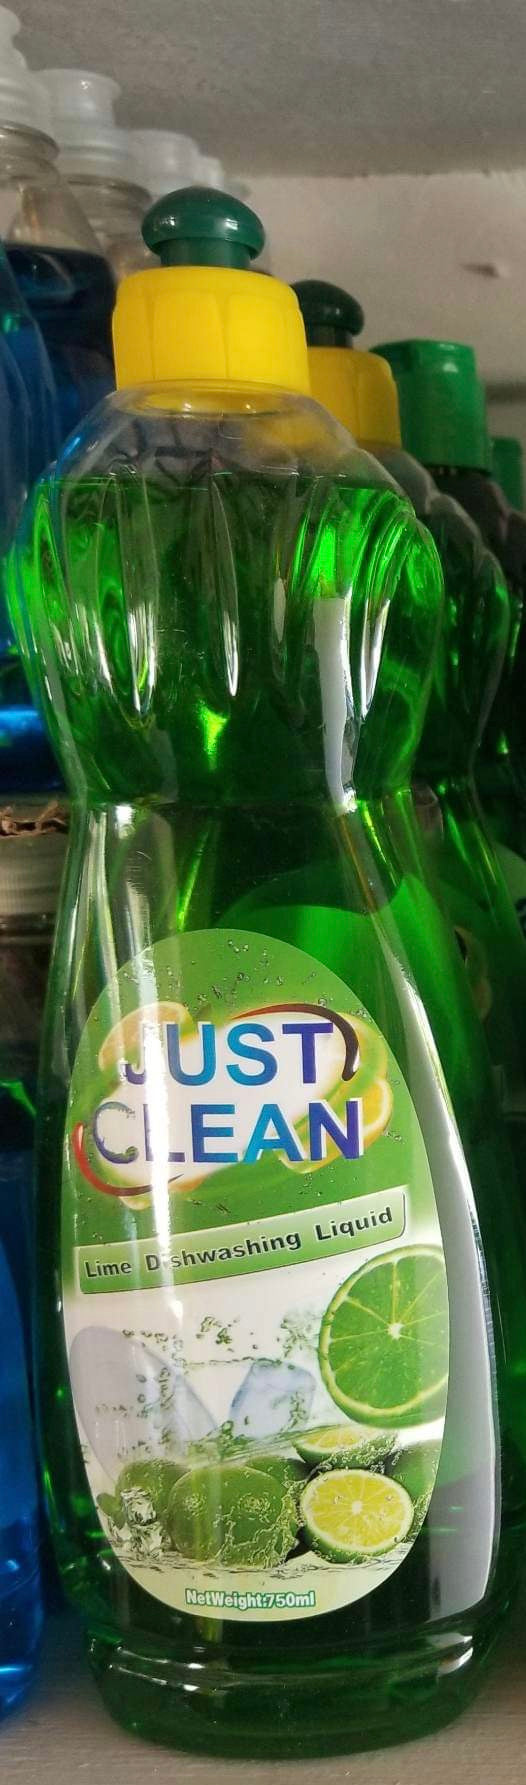 Just clean-dish soap